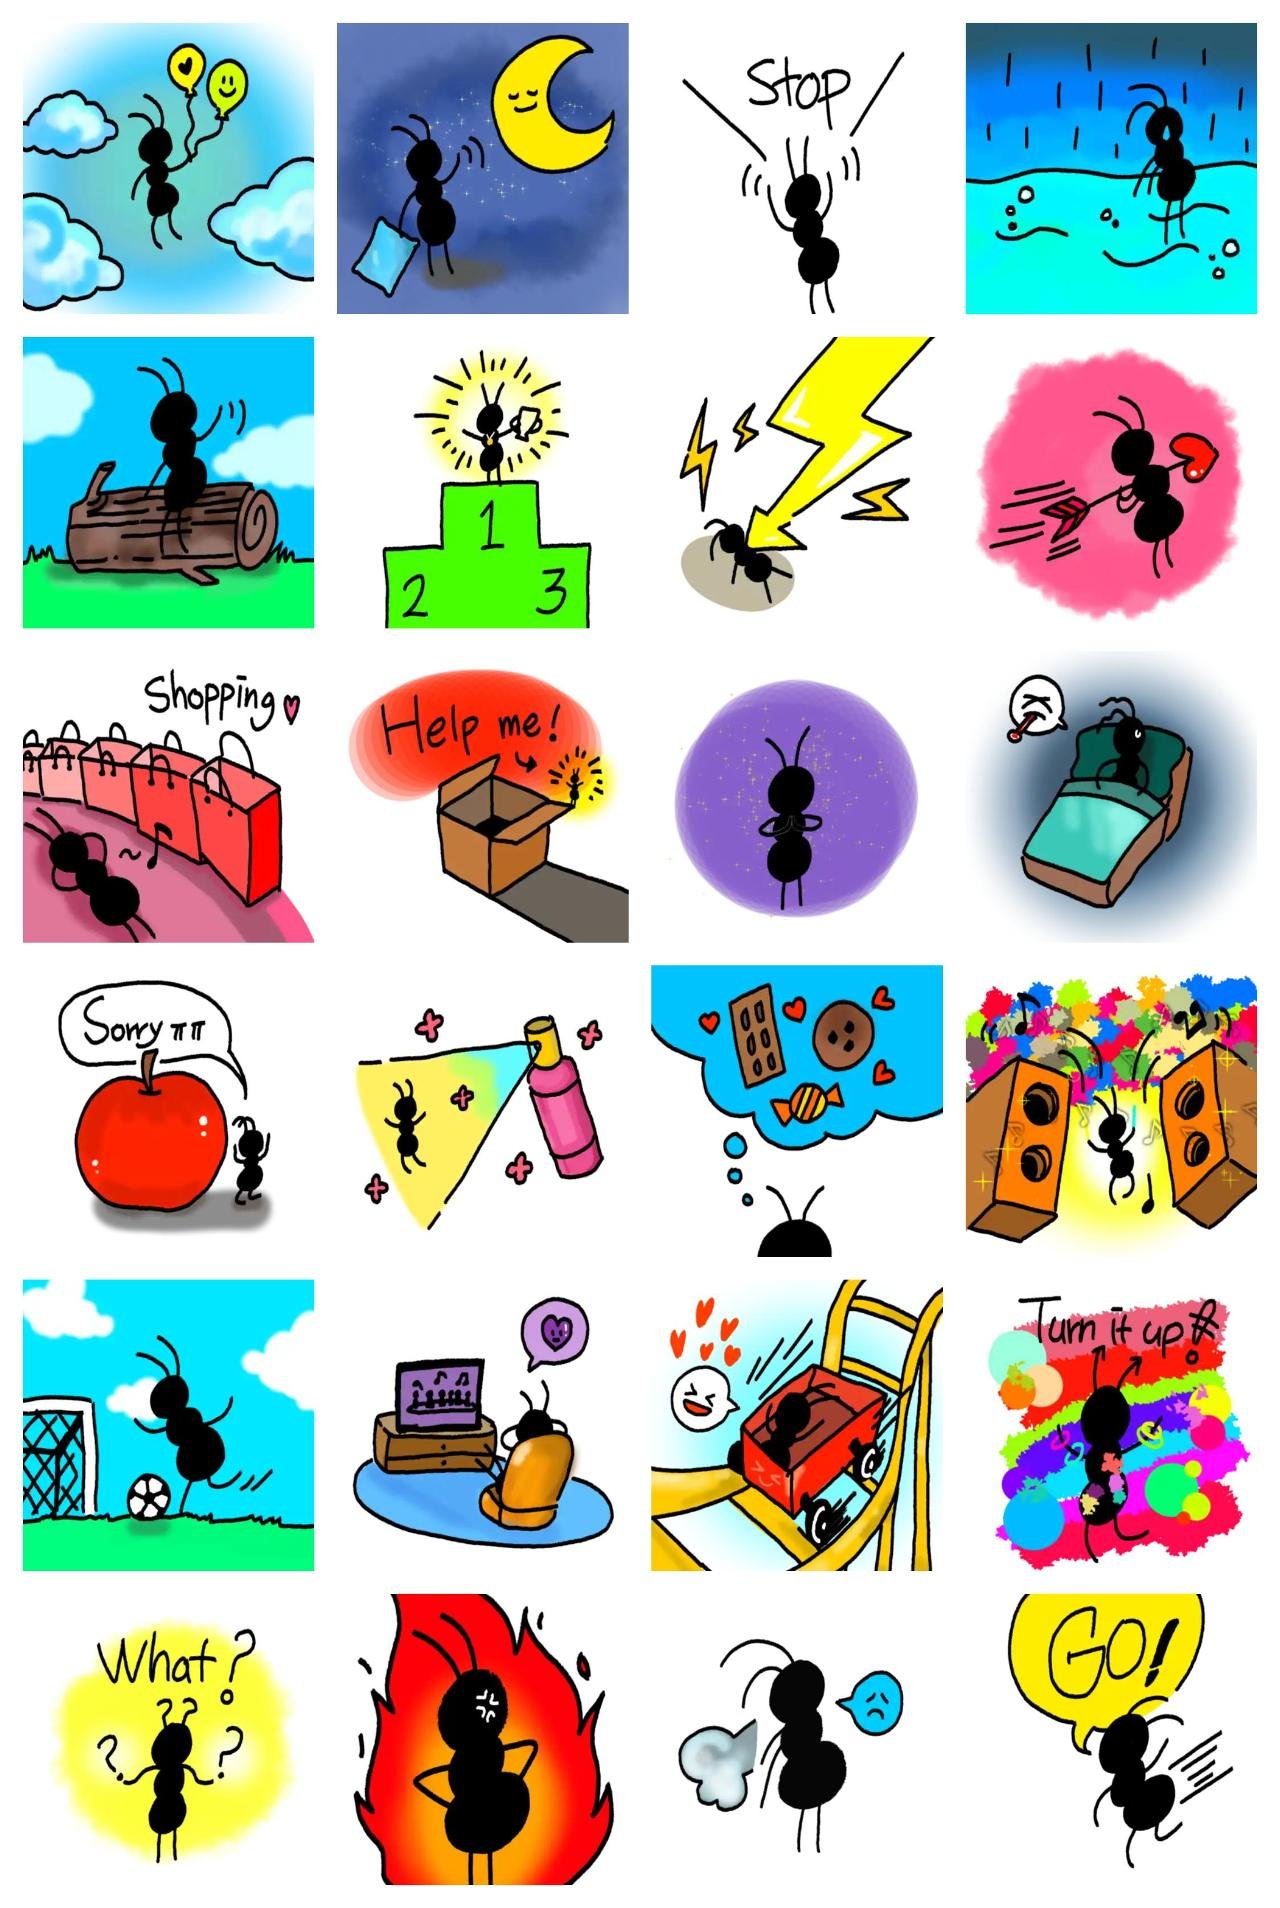 Worker ant3 Etc. sticker pack for Whatsapp, Telegram, Signal, and others chatting and message apps